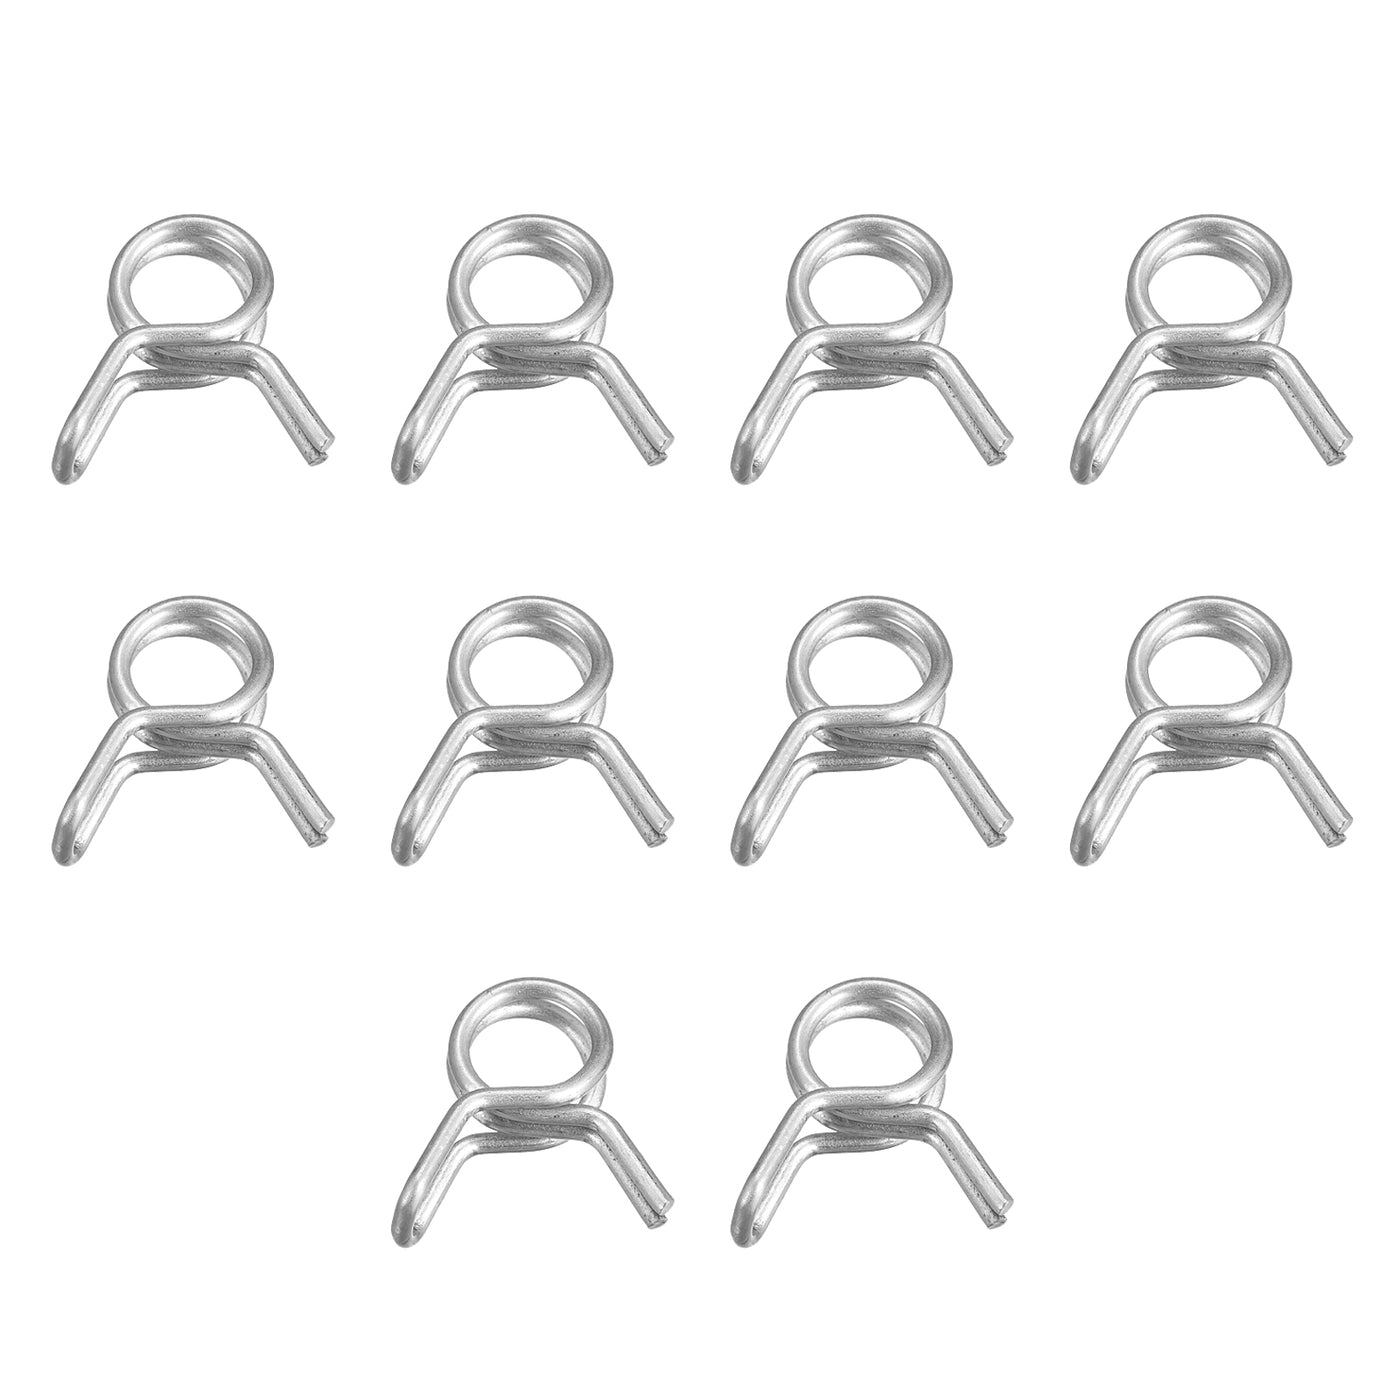 Uxcell Uxcell Double Wire Spring Hose Clamp, 10pcs 304 Stainless Steel 13mm Spring Clips